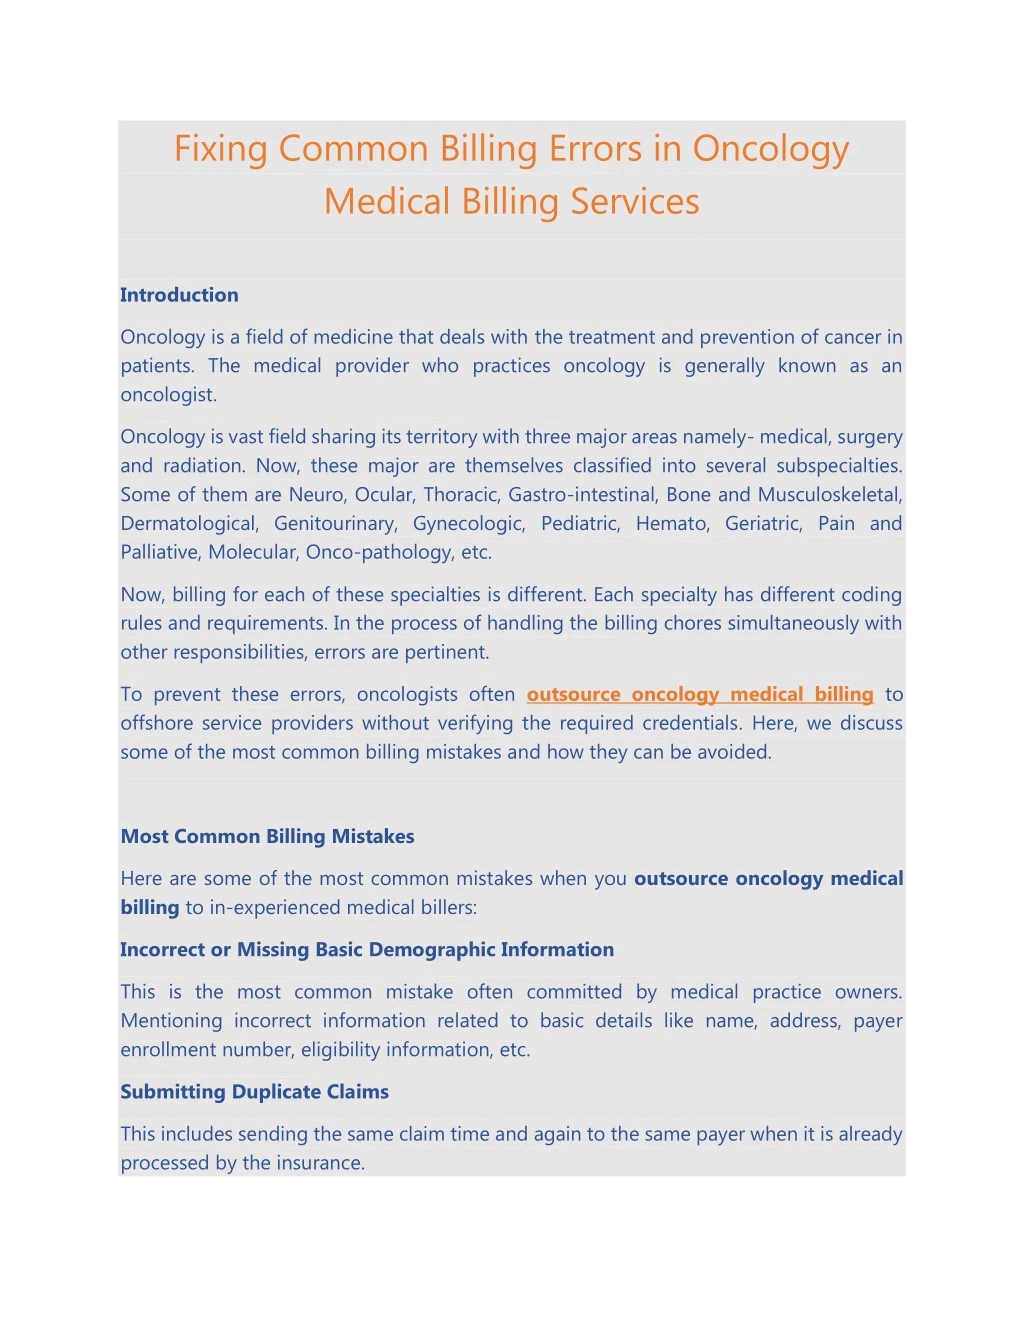 fixing common billing errors in oncology medical